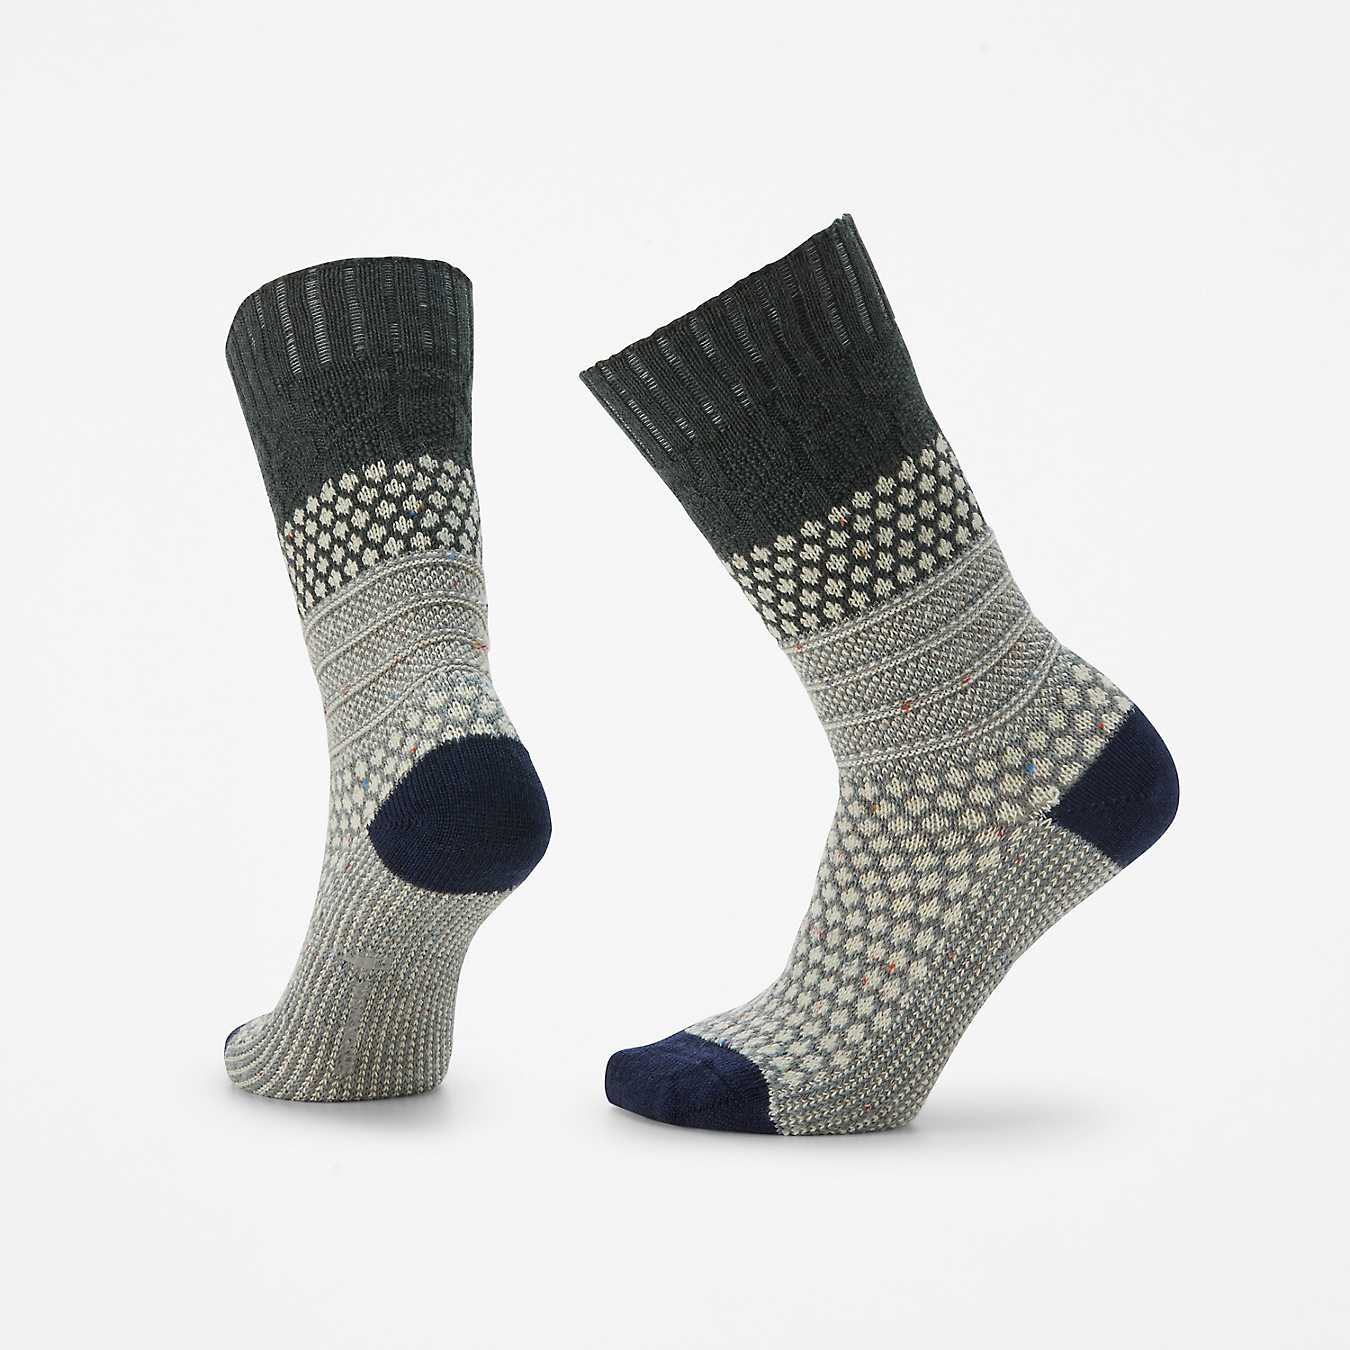 Mi-chaussette Smartwool® Everyday Everyday Popcorn pour femmes